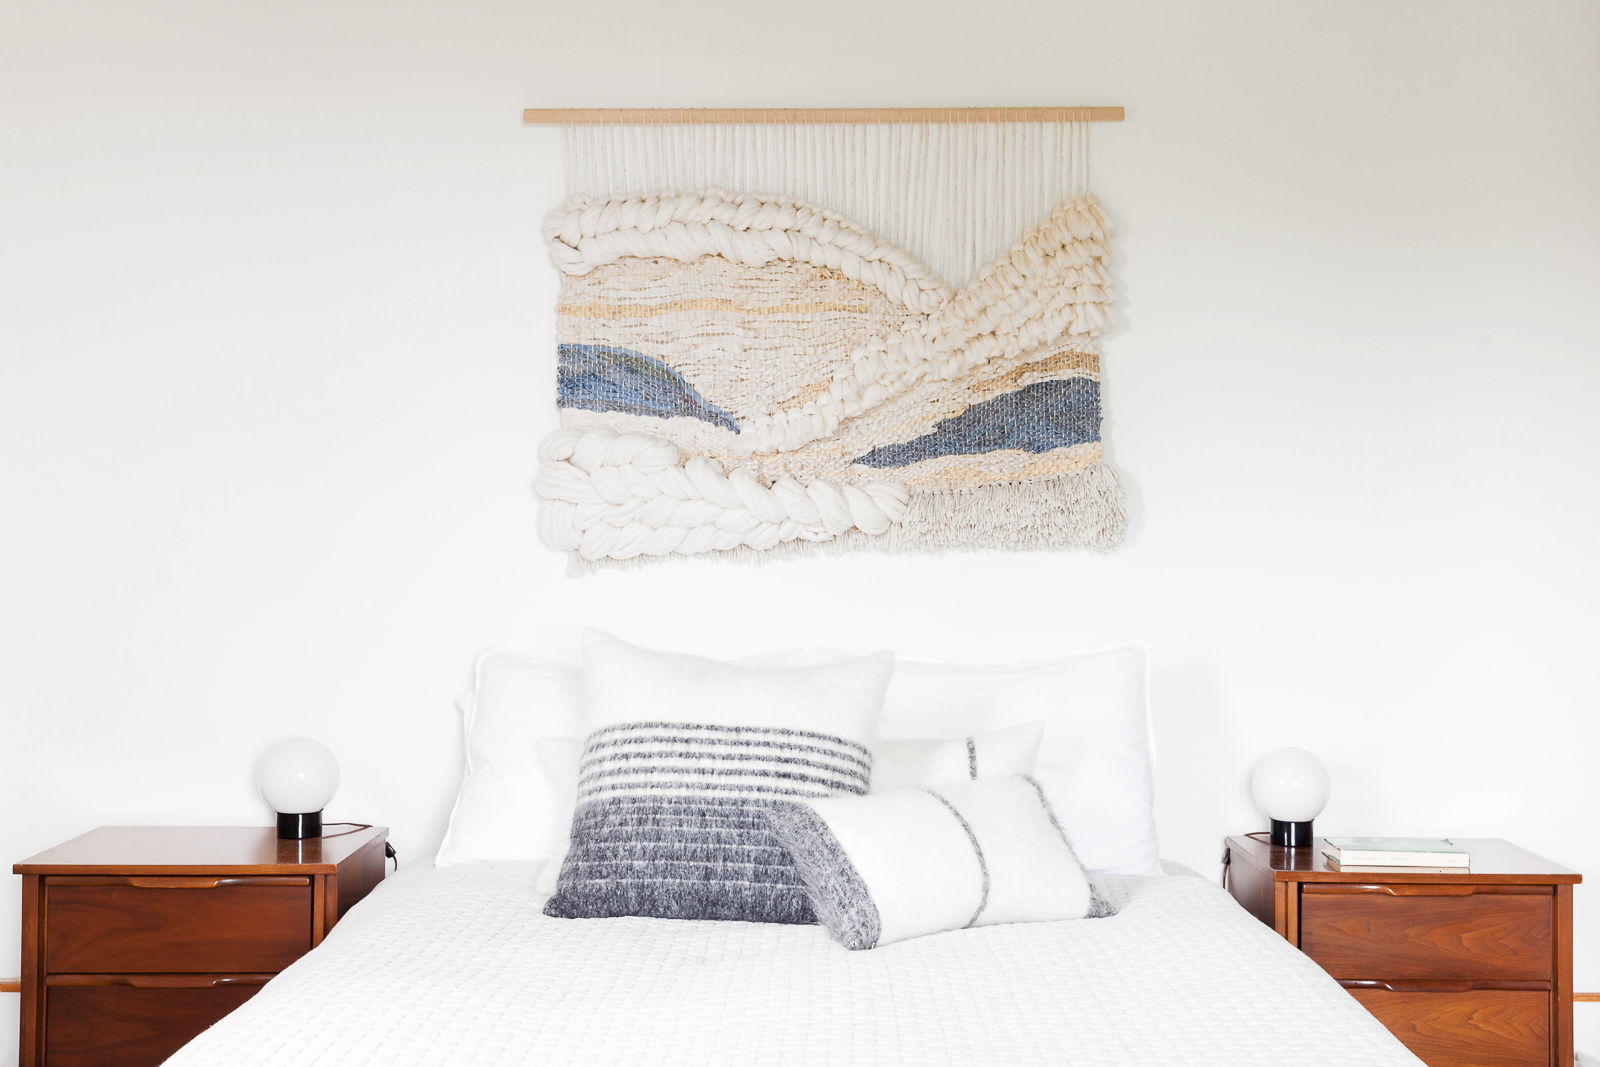 Macrame art wall hanging over bed